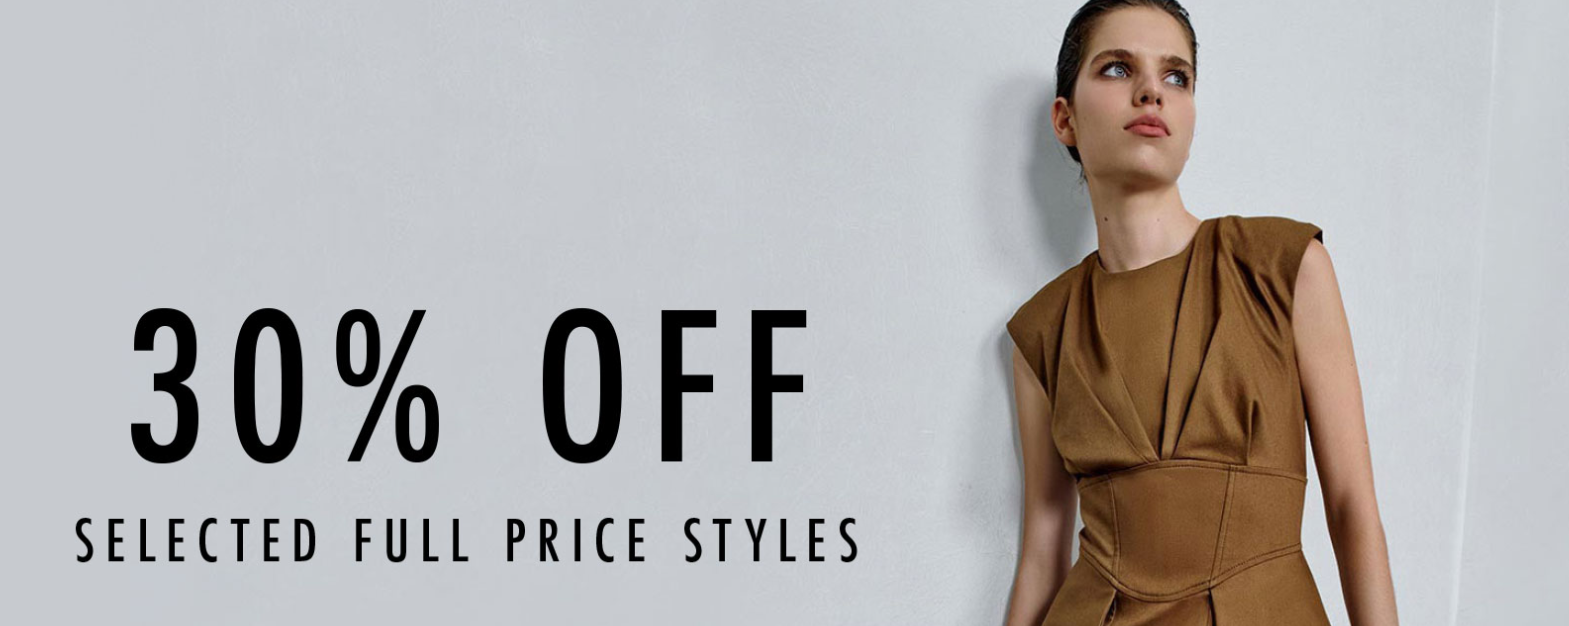 30-50% OFF on selected full priced styles